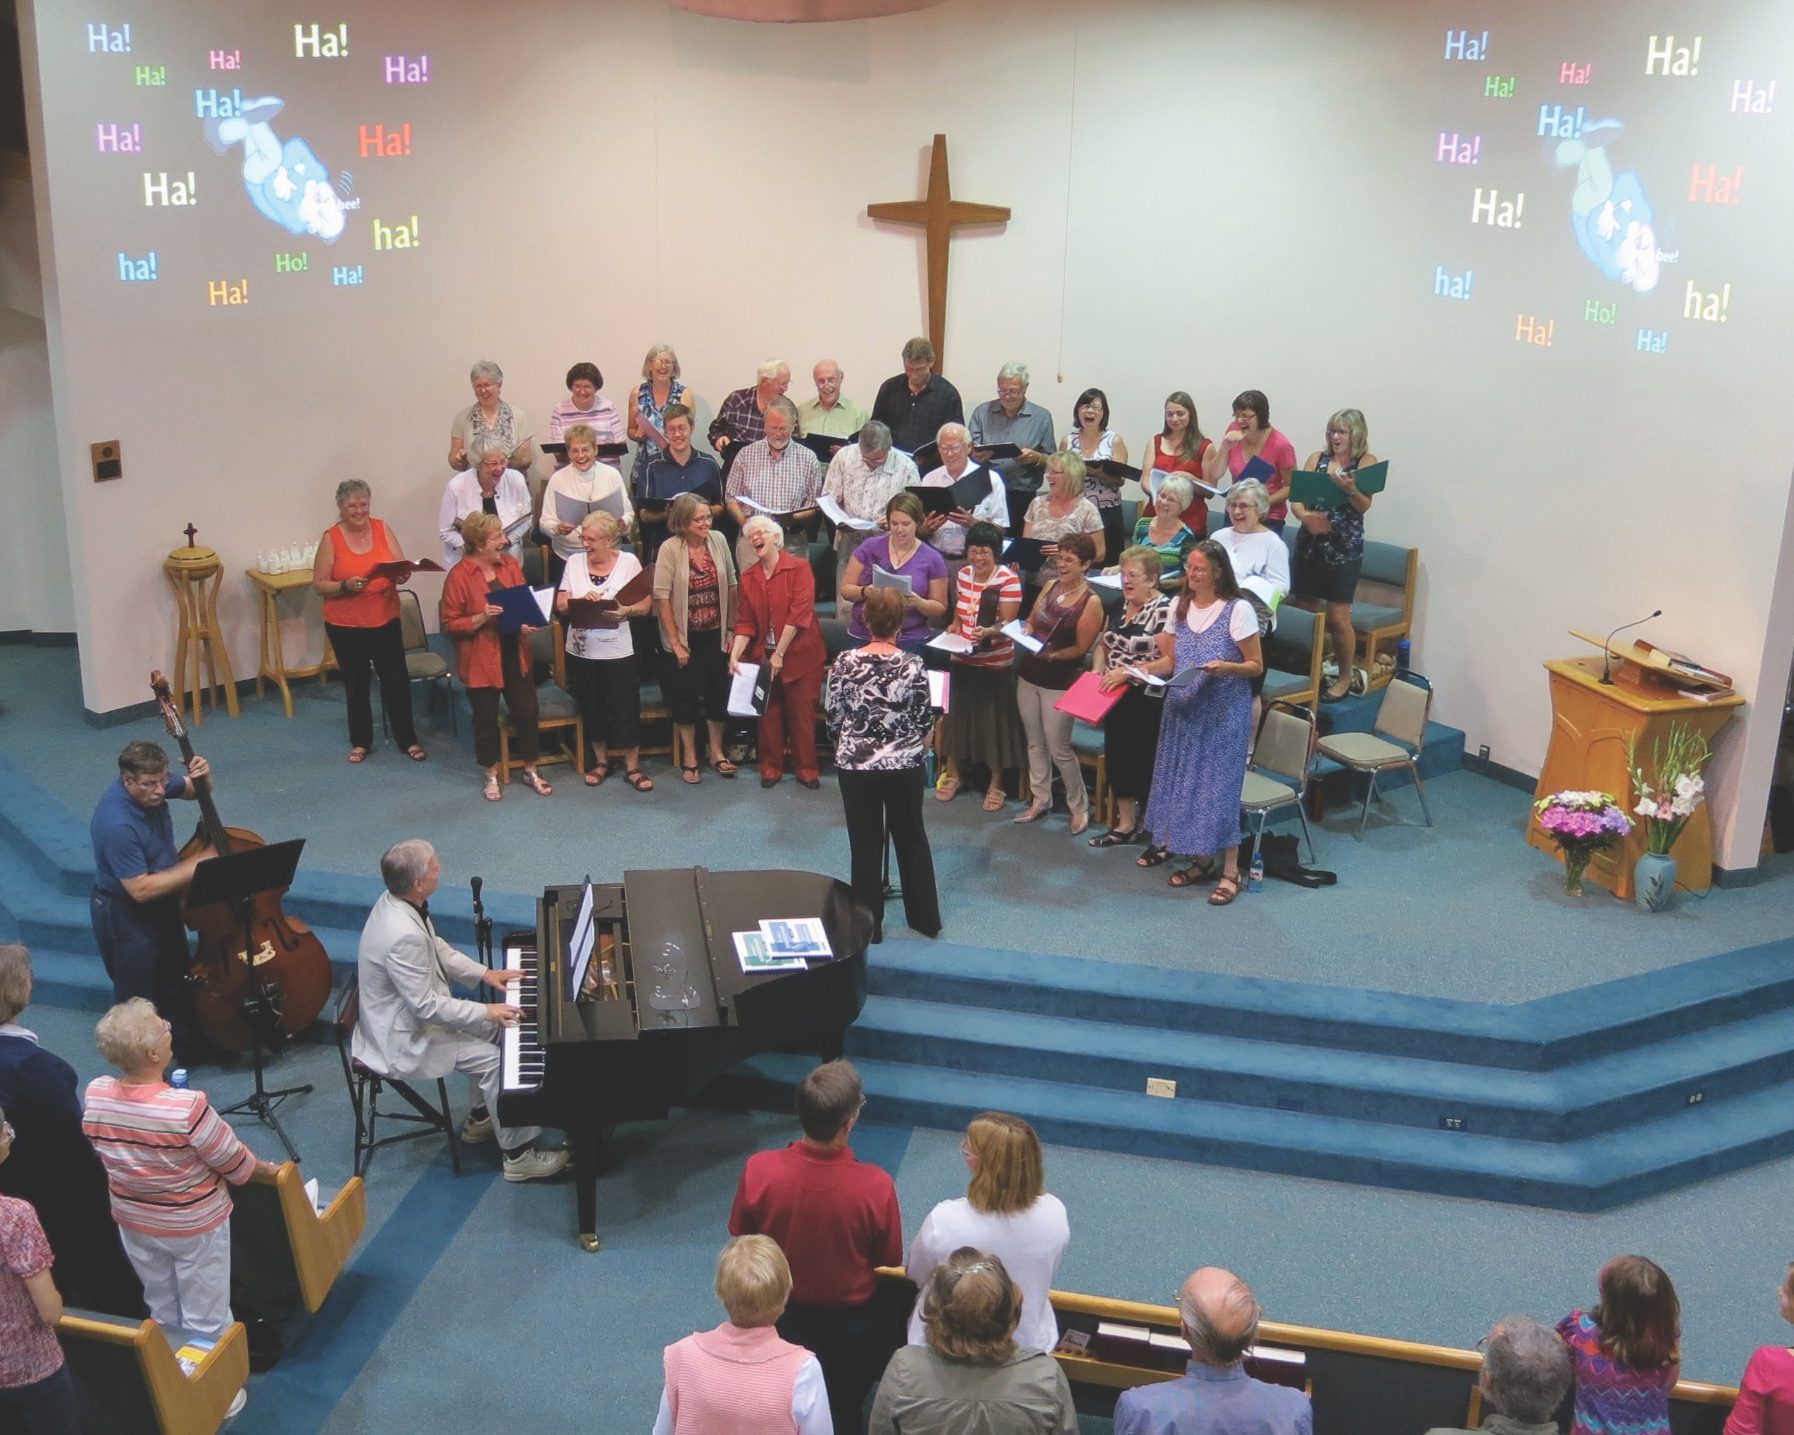 Congregation at service, with piano